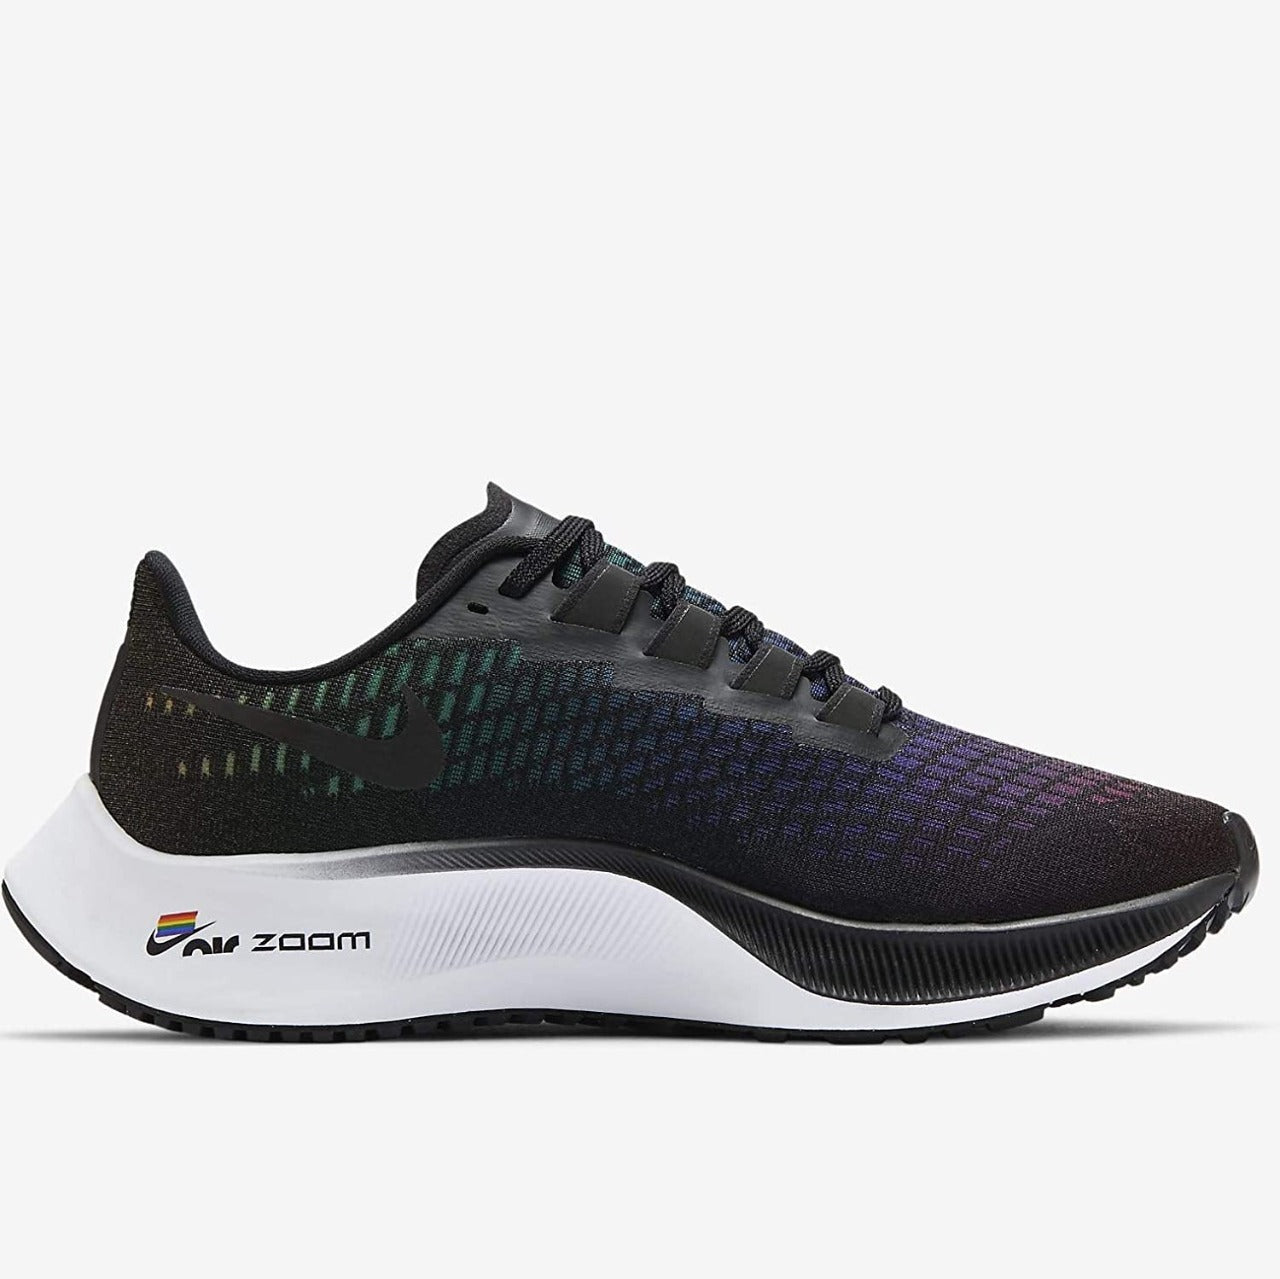 Nike Air Zoom Pegasus 37 Be True Black White Multi-Color Shoes For Man And Women CV0266-001